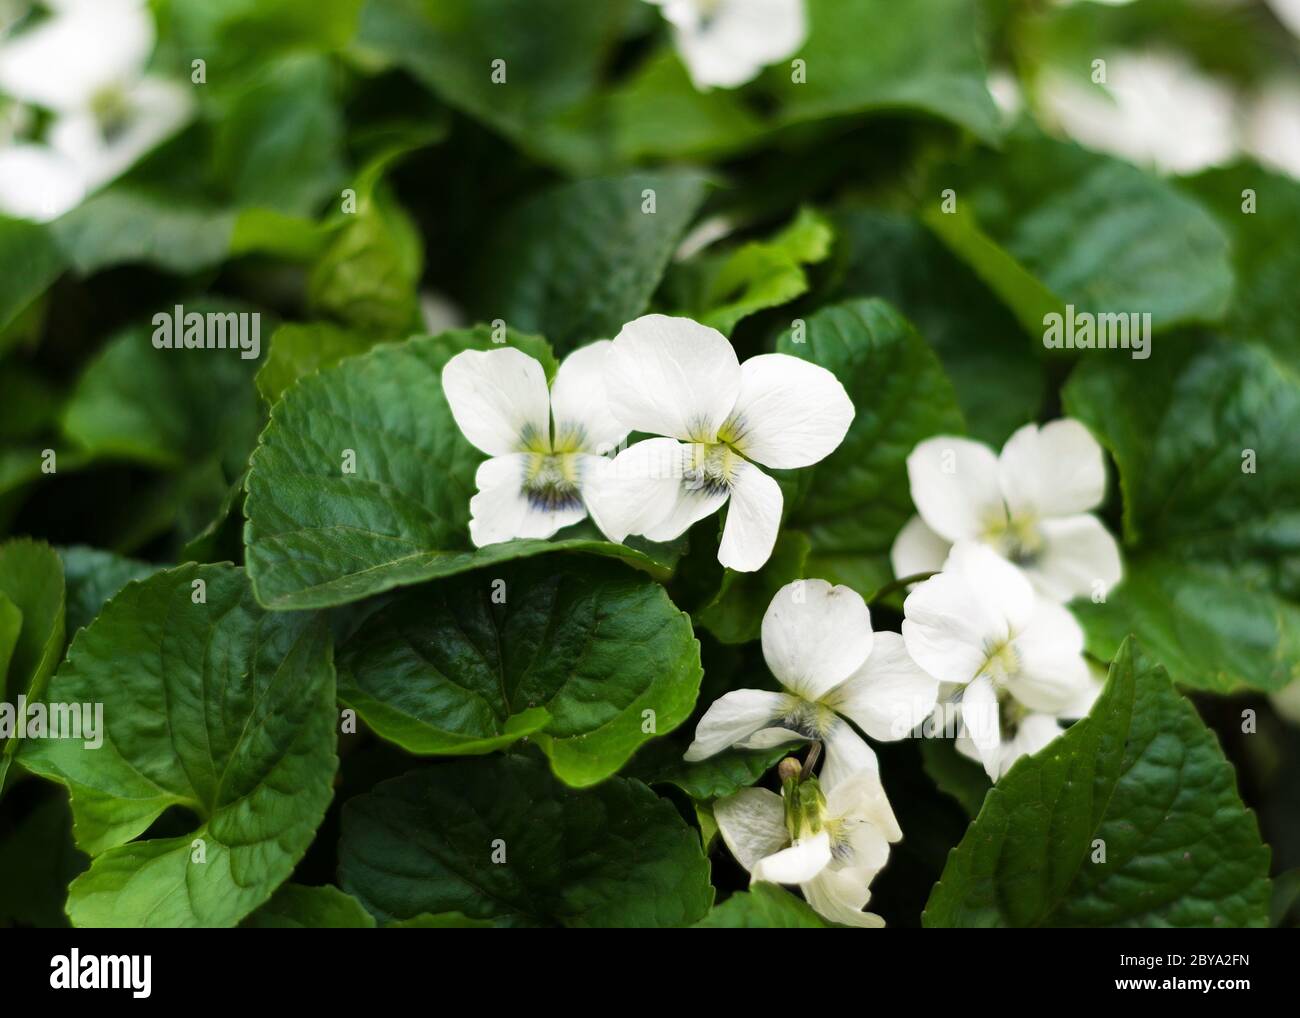 White flowers of wild violets Stock Photo